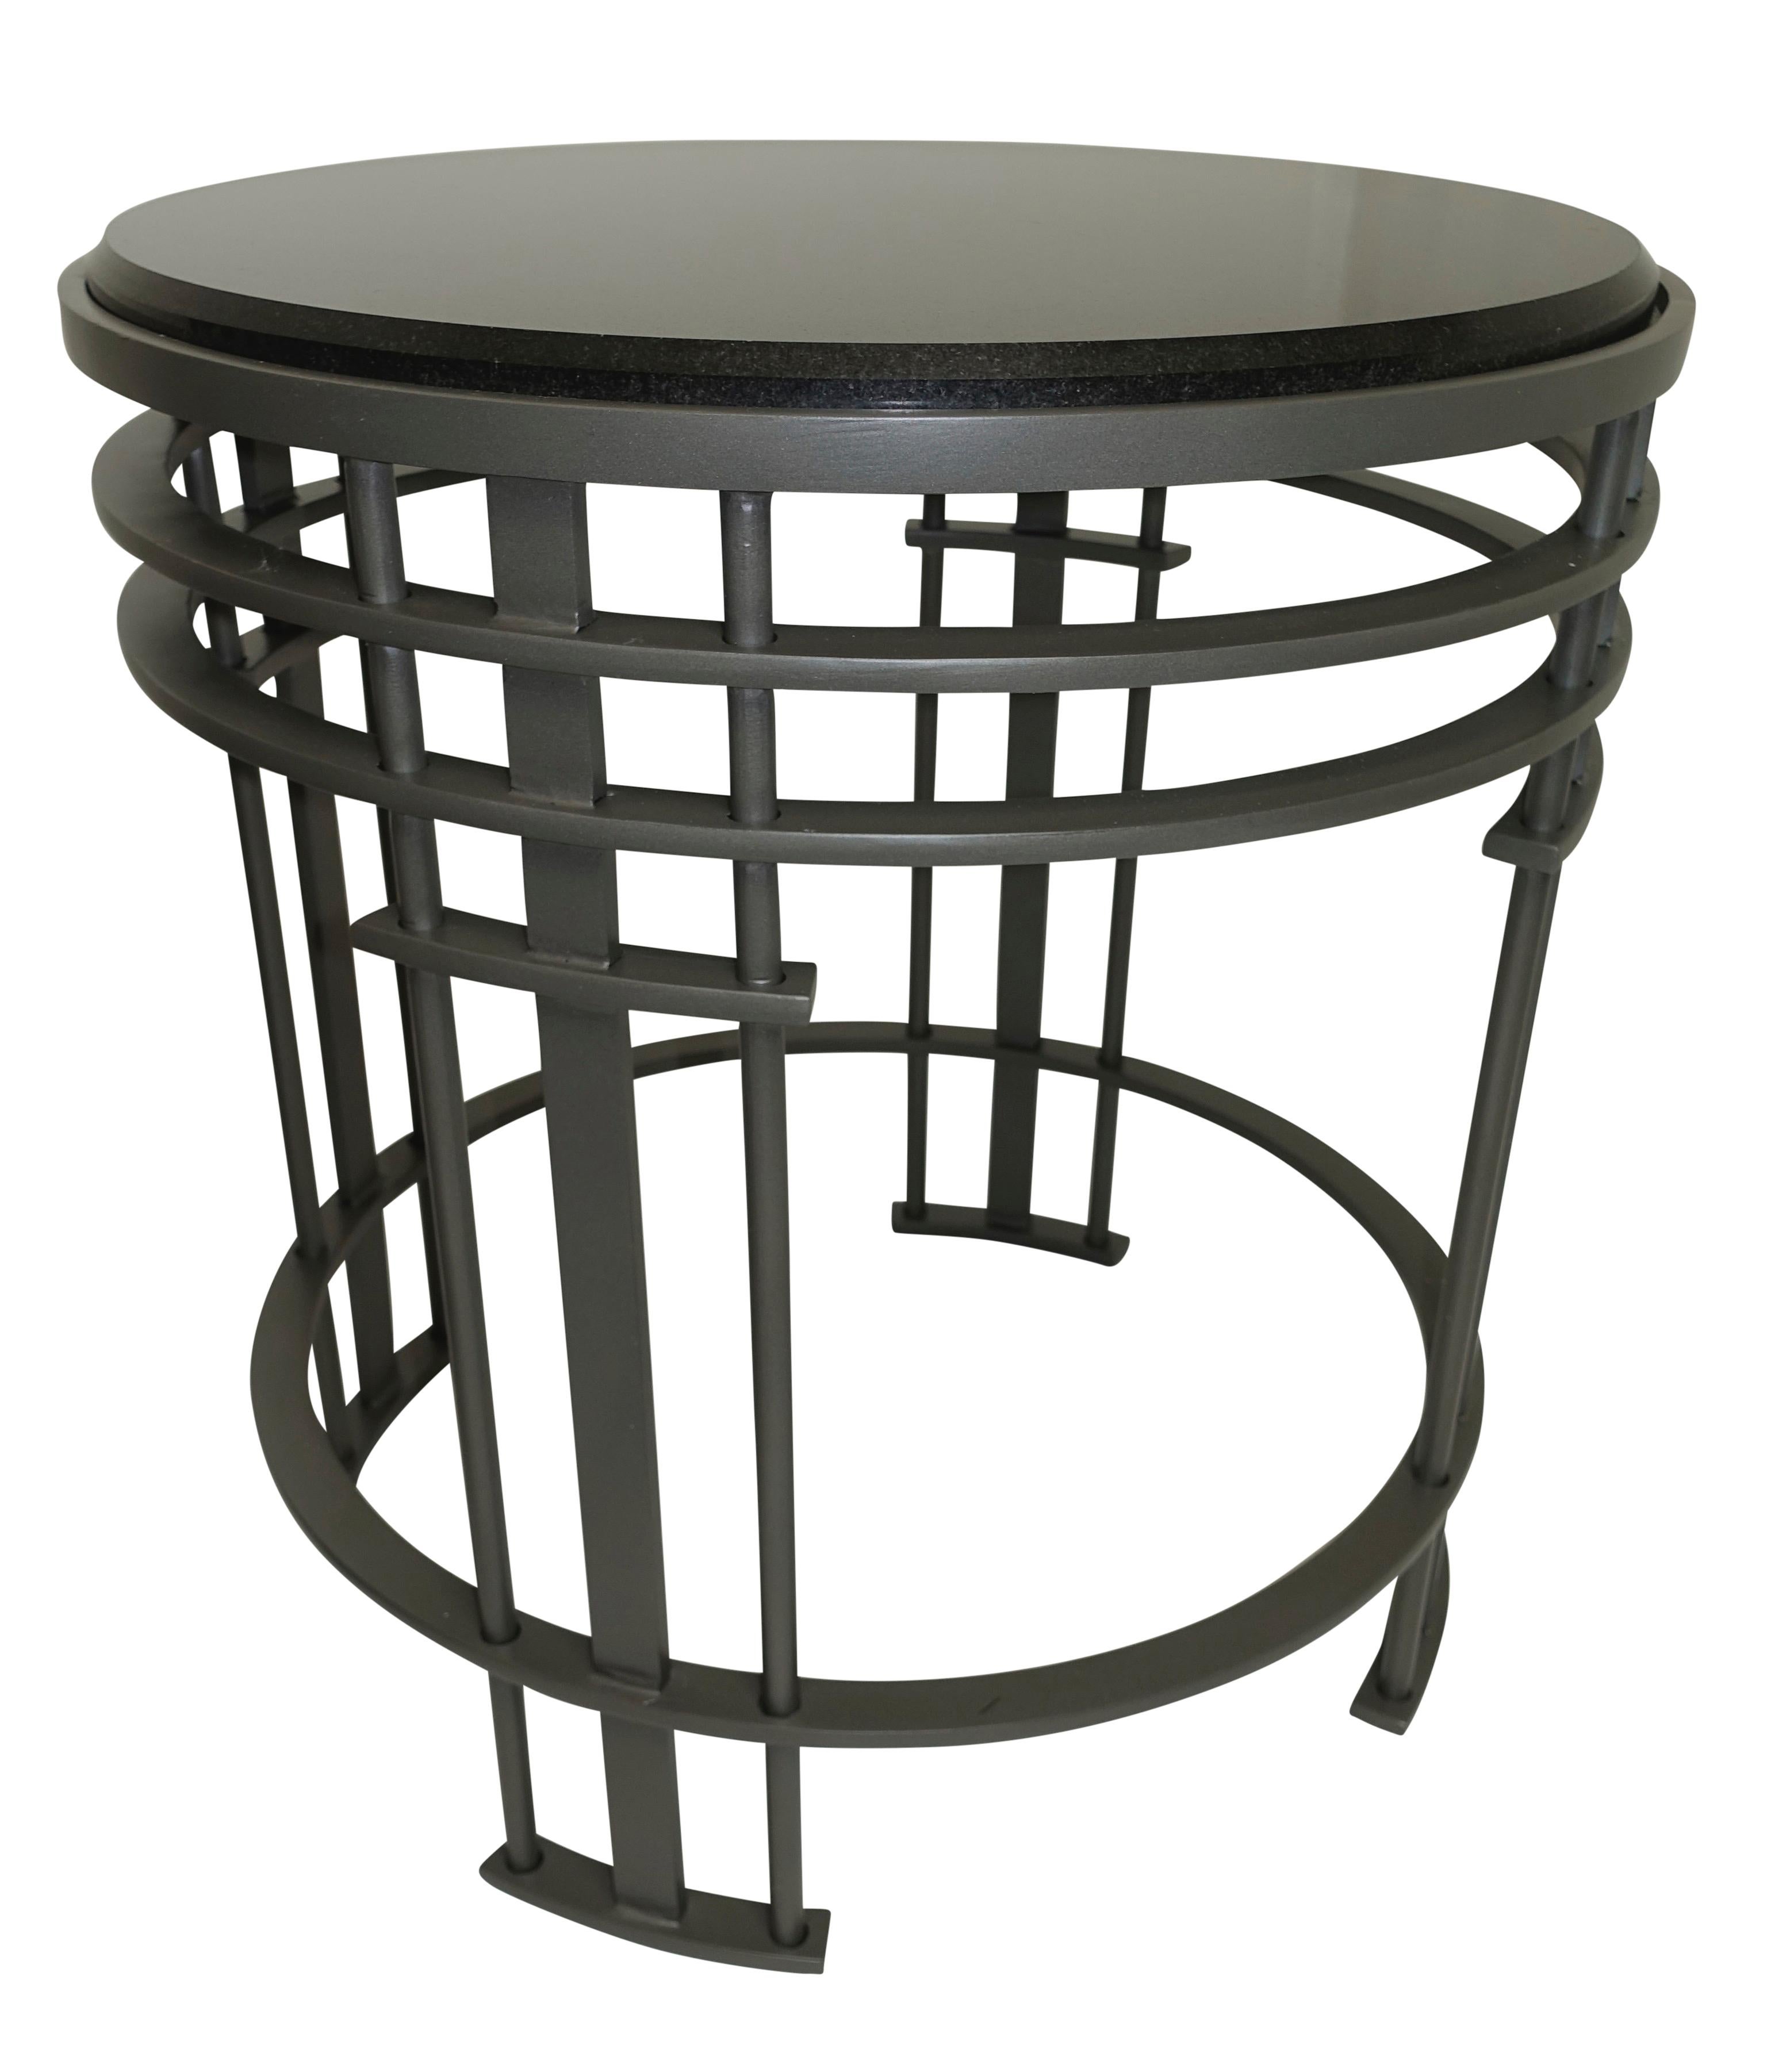 American Pair of Streamline Modern Round Side Tables with Black Granite Tops For Sale